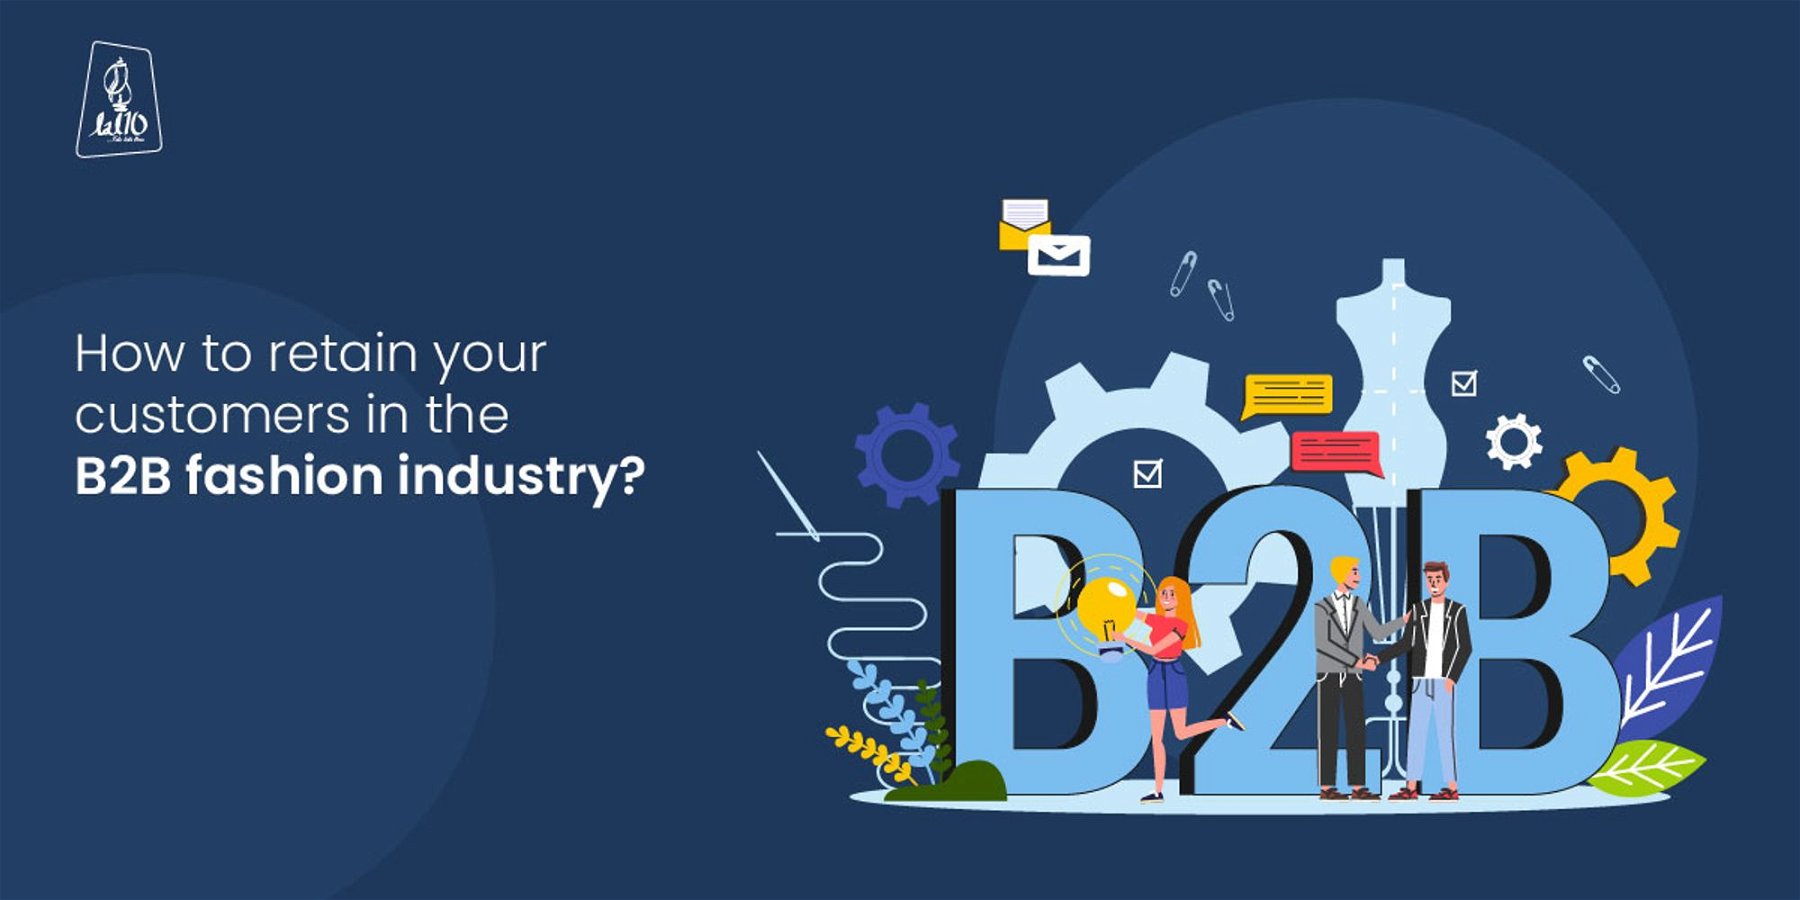 How to retain your customers in the B2B fashion industry?